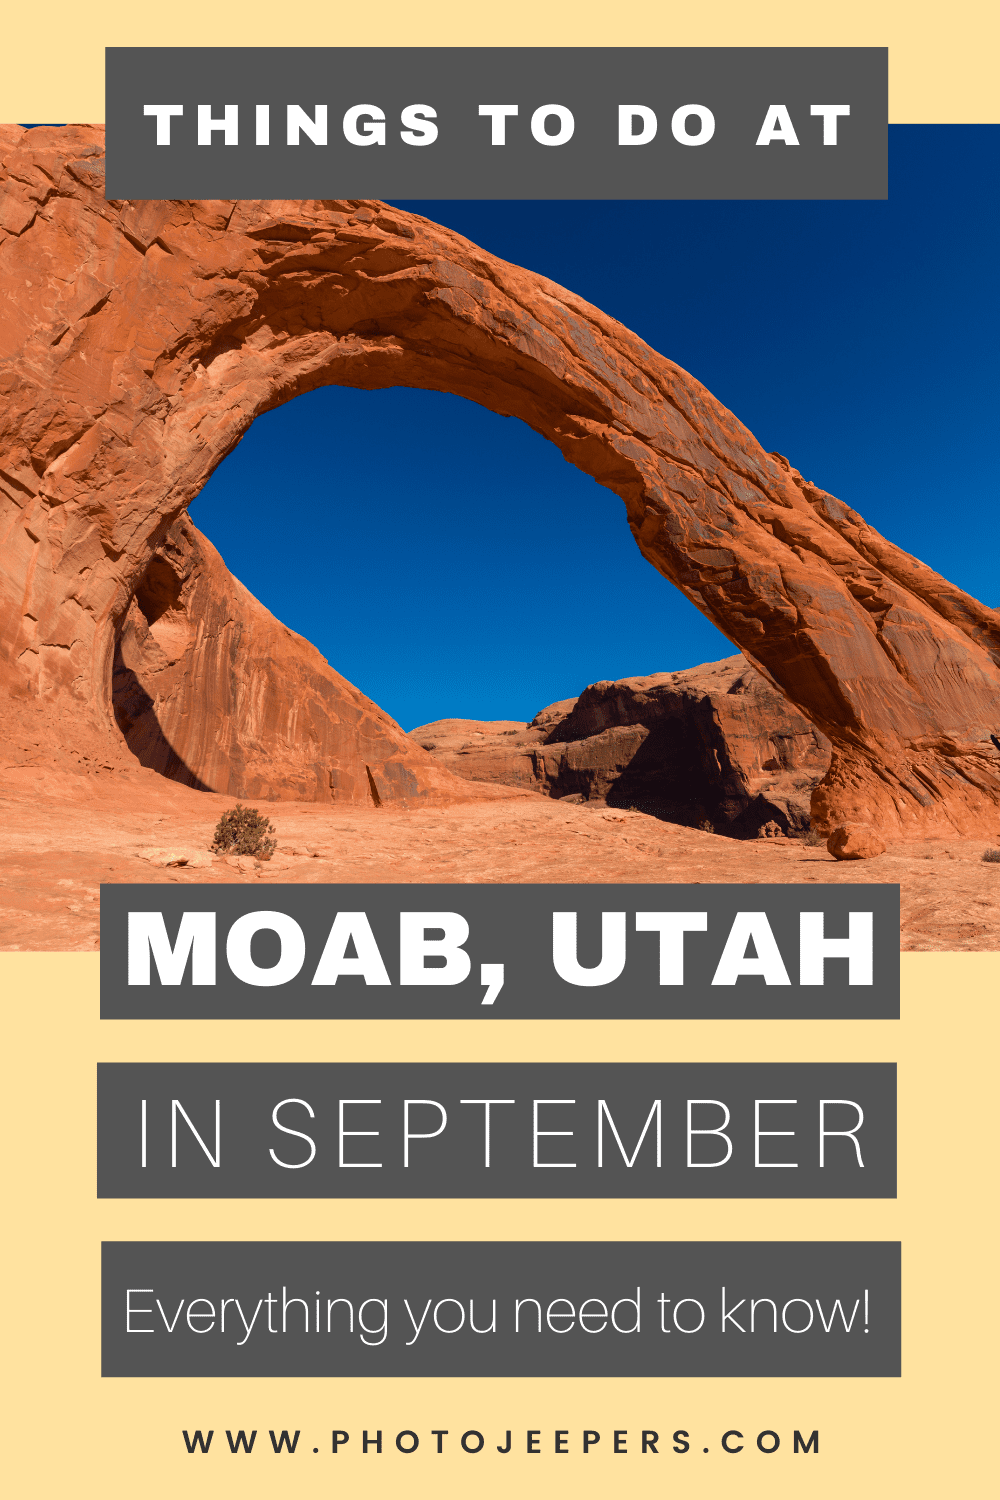 Visiting Moab in September PhotoJeepers